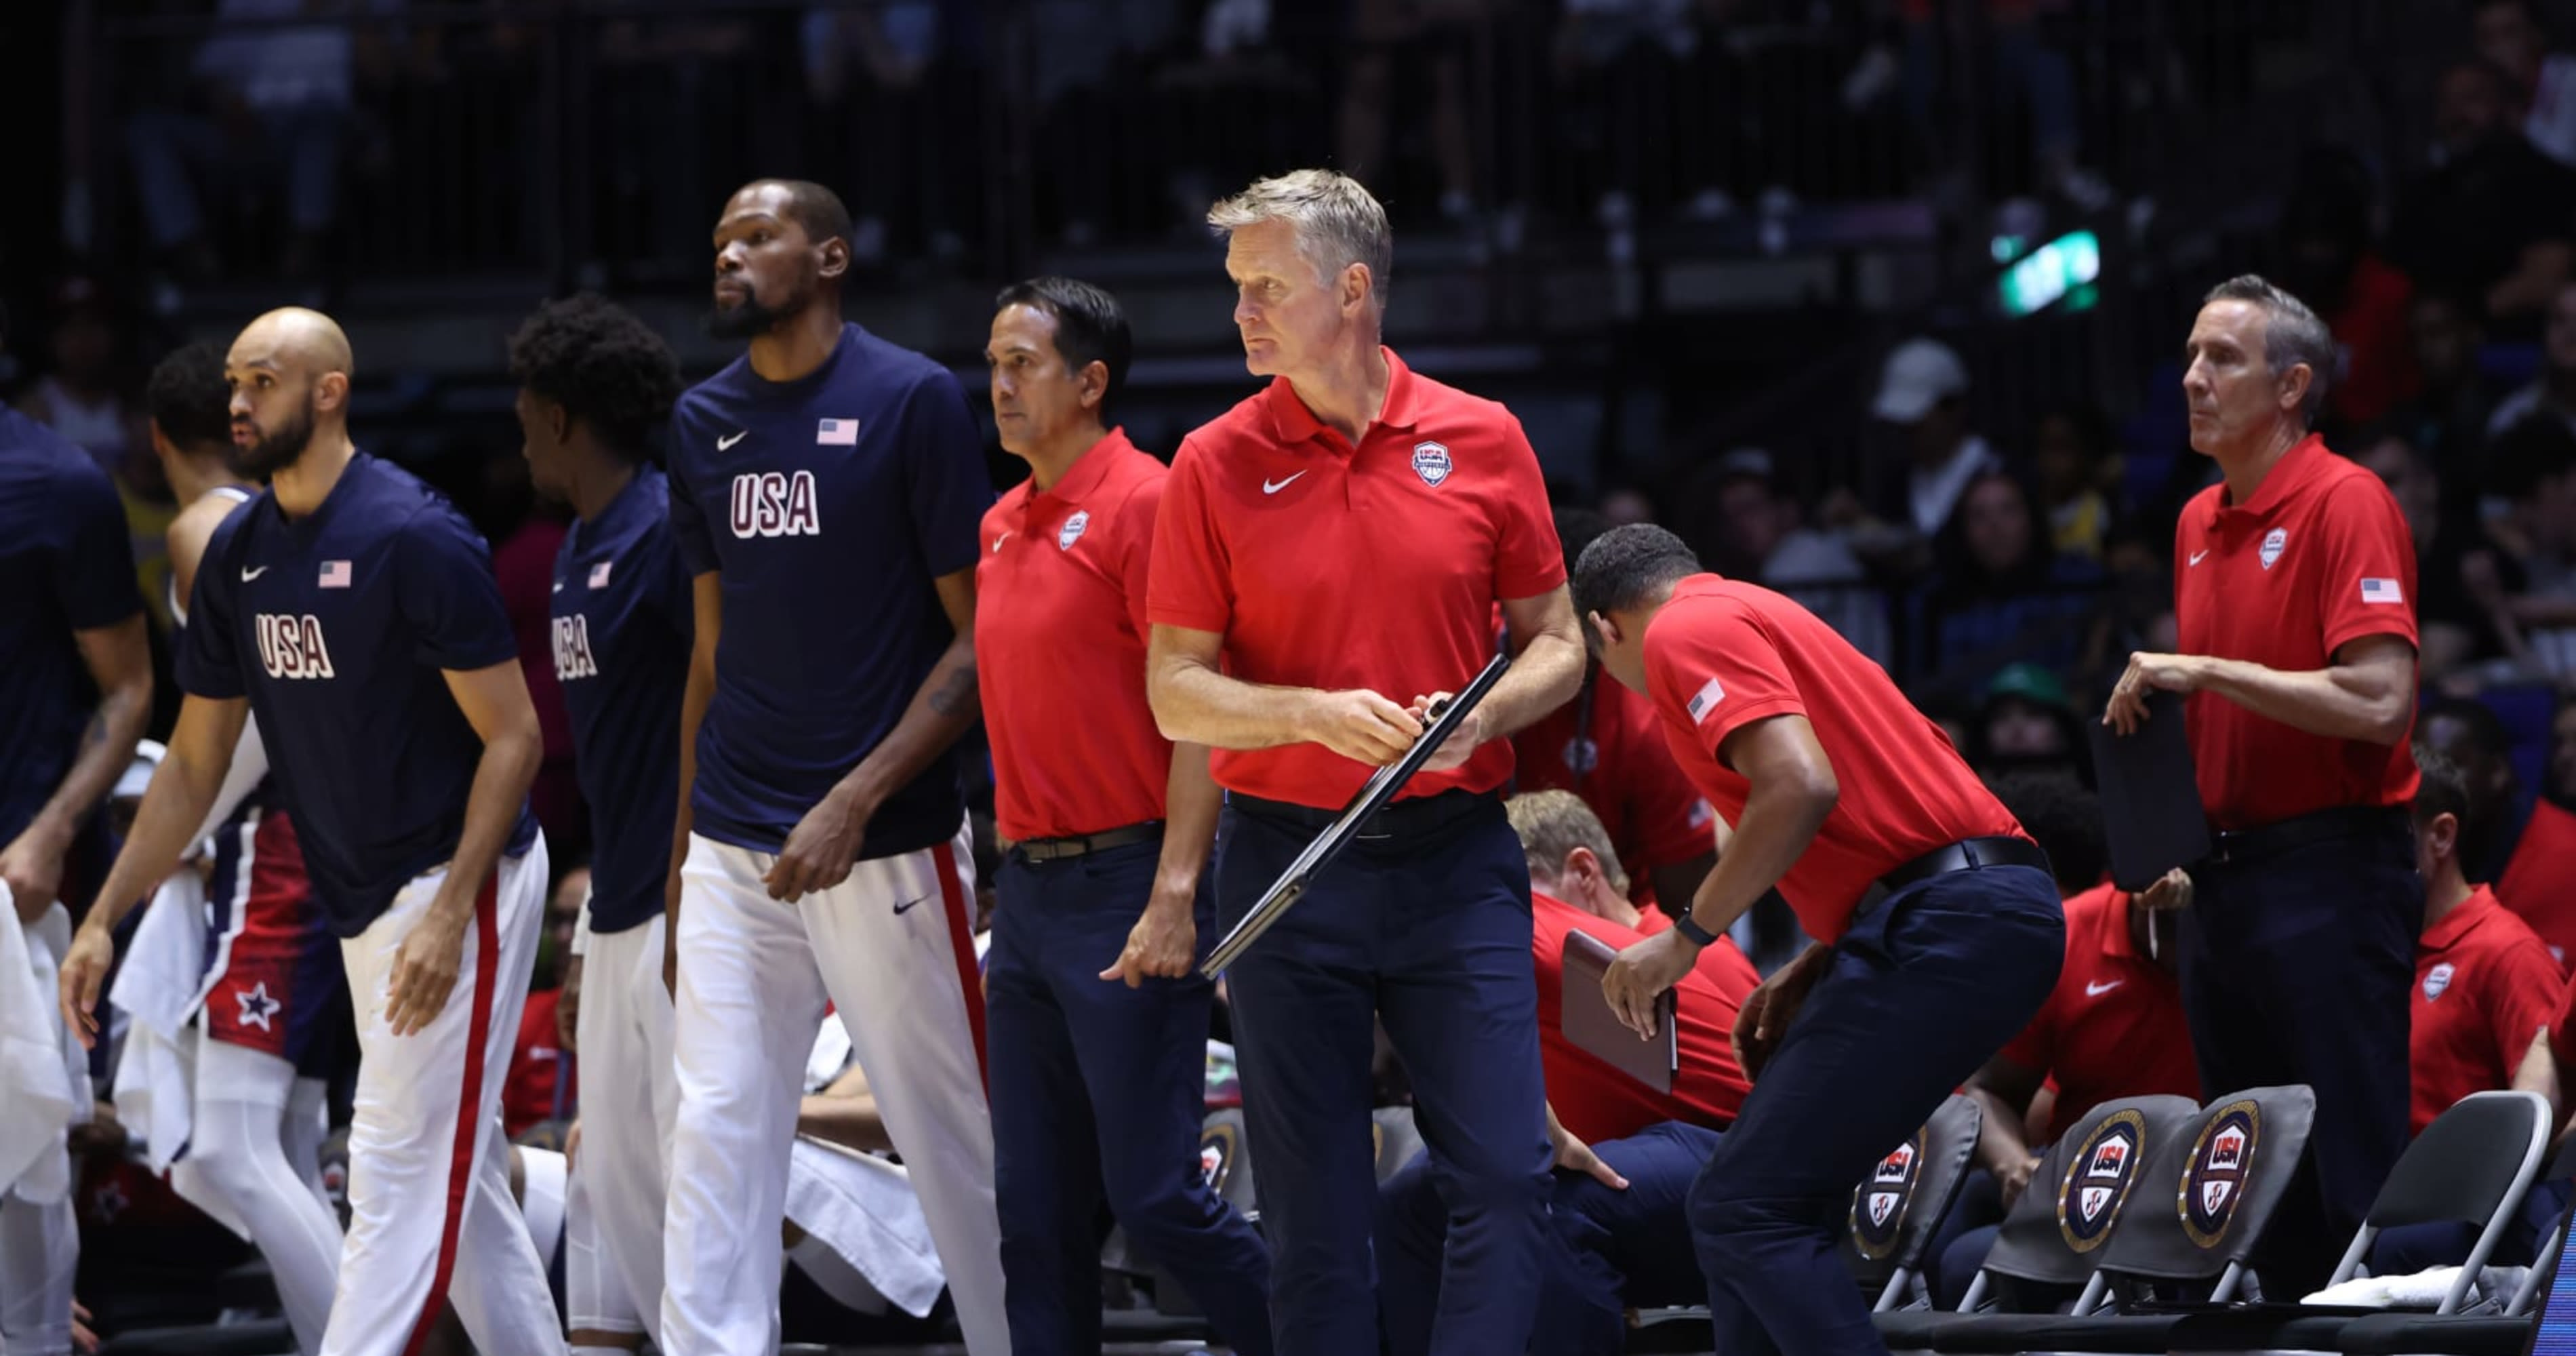 Steve Kerr: 'I Did Not Do a Great Job Preparing' Team USA for South Sudan Exhibition